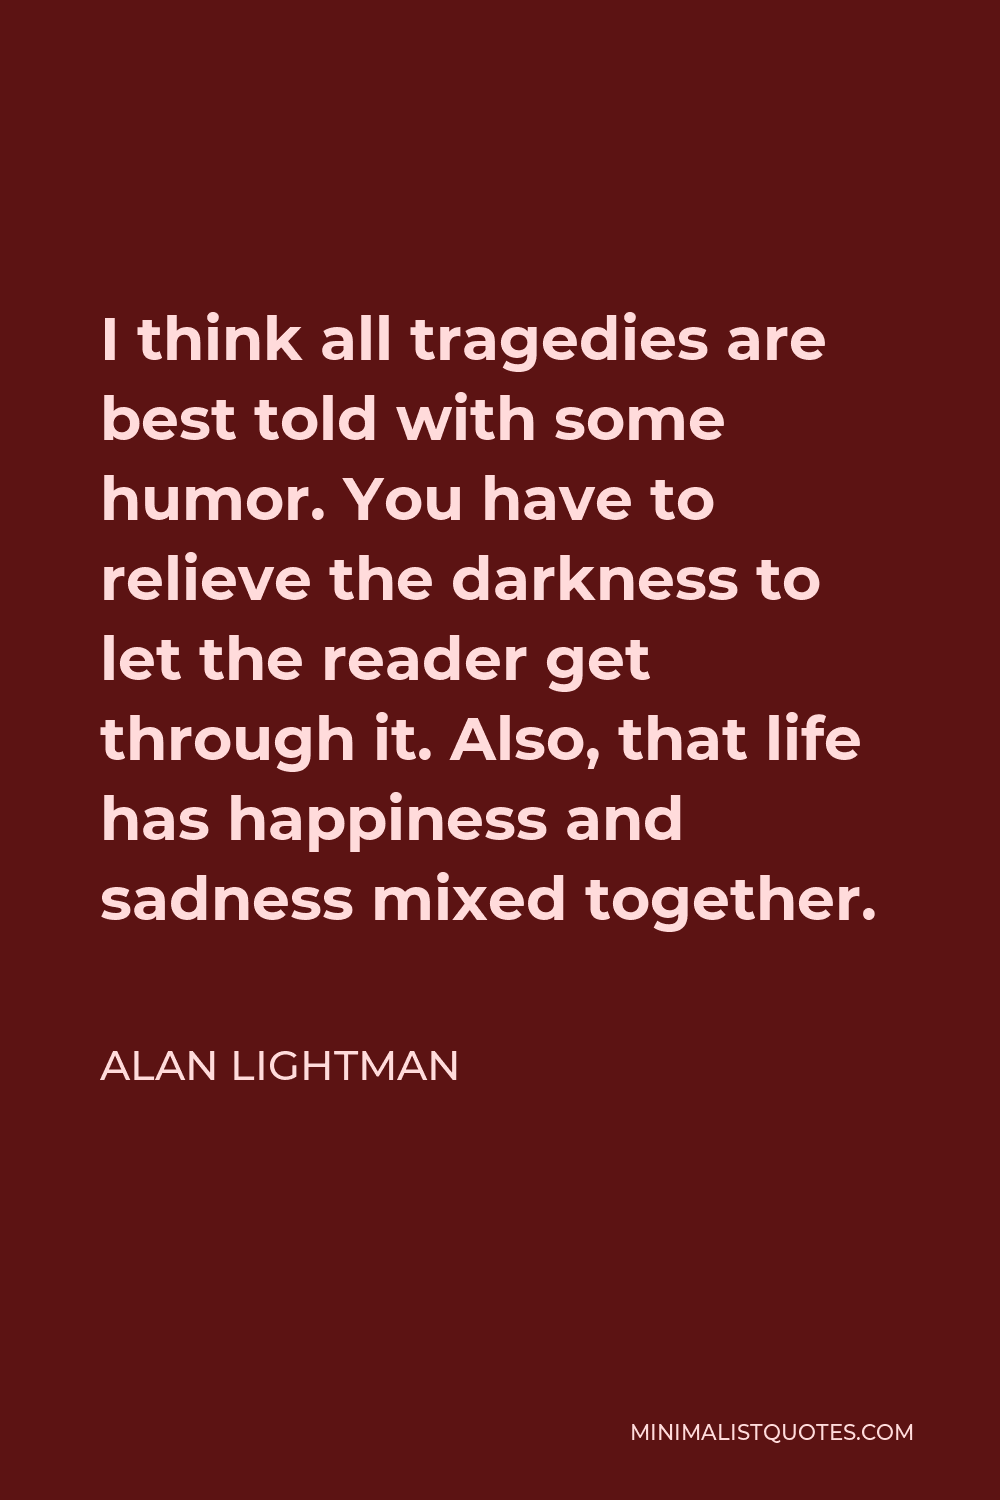 Alan Lightman Quote - I think all tragedies are best told with some humor. You have to relieve the darkness to let the reader get through it. Also, that life has happiness and sadness mixed together.